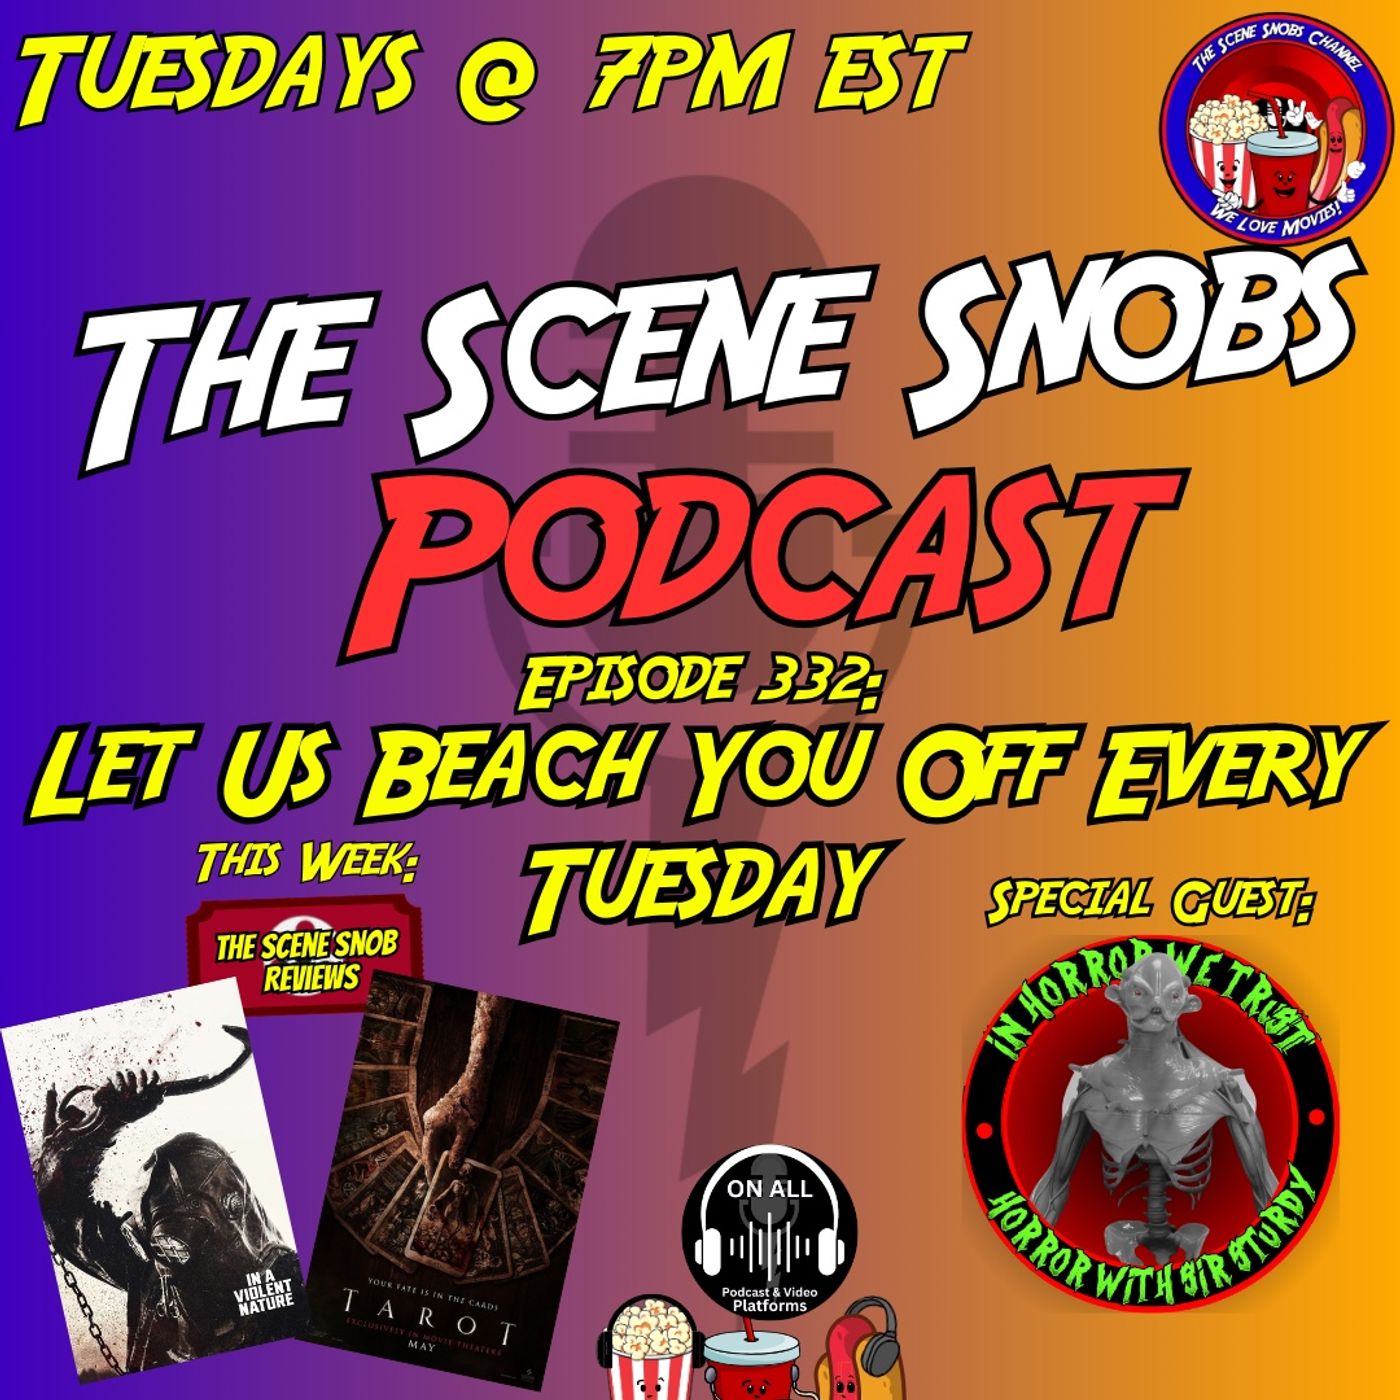 The Scene Snobs Podcast – Let Us Beach You Off Every Tuesday!